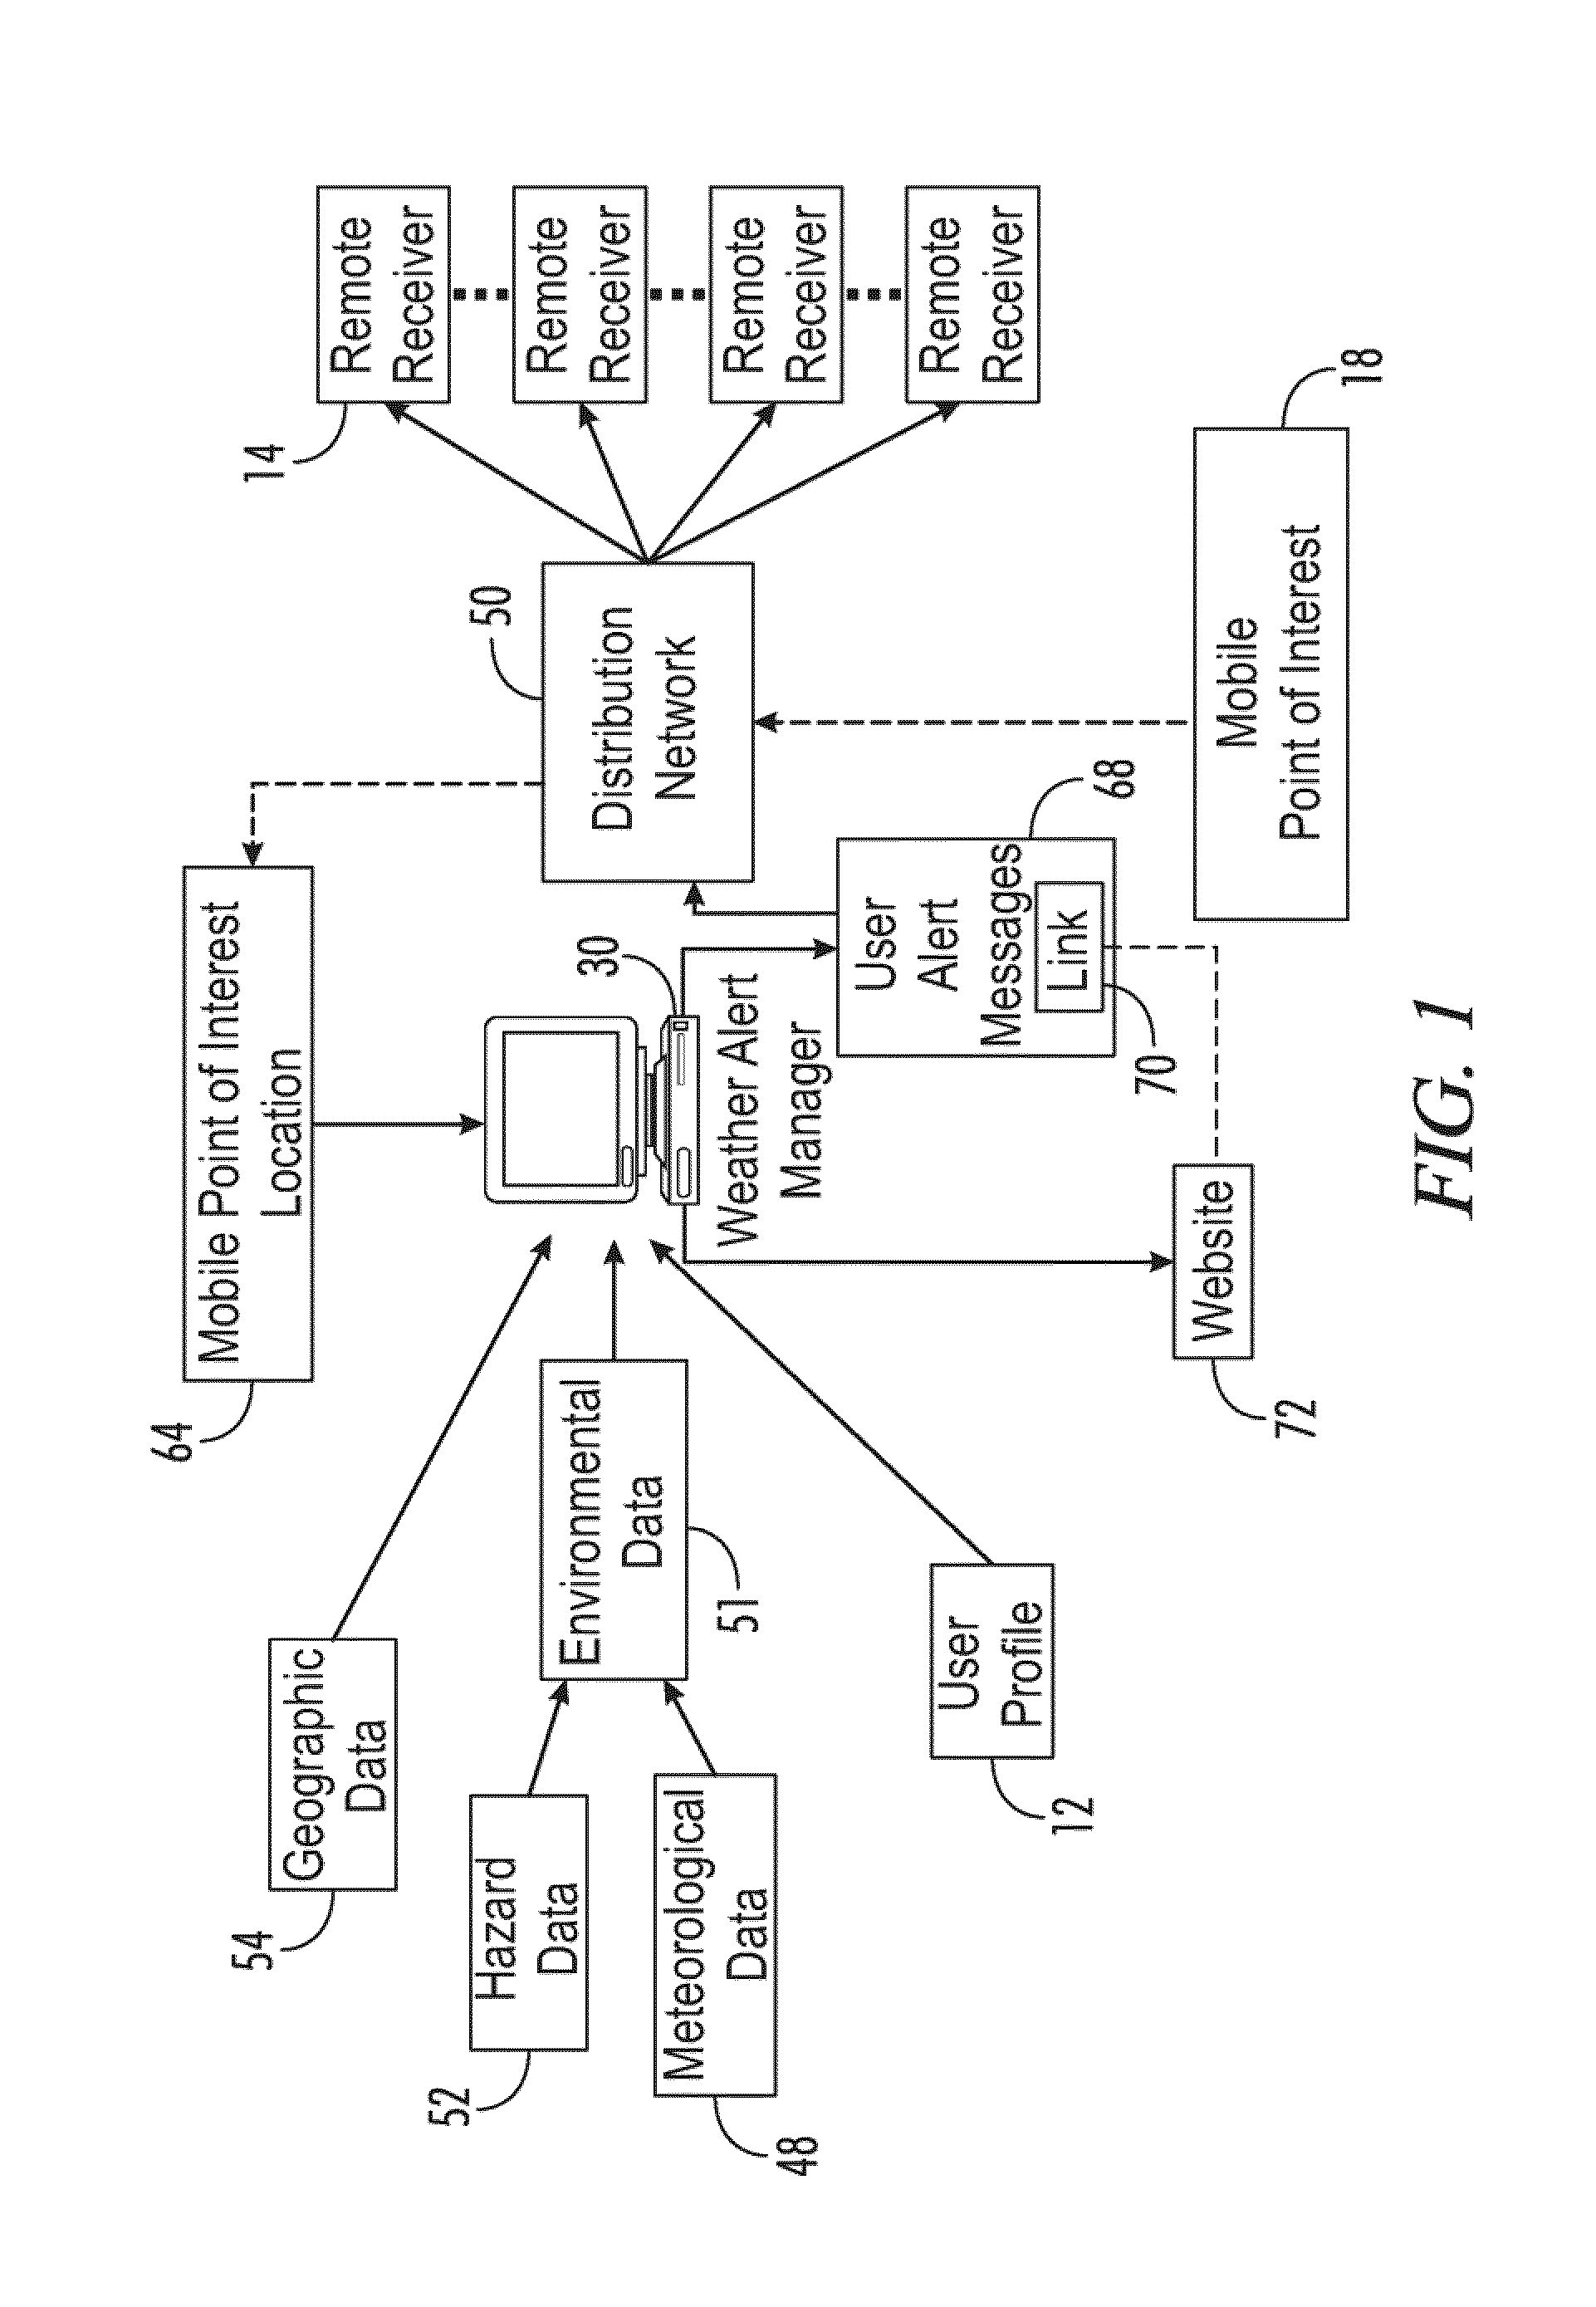 System and method of providing real-time site specific information